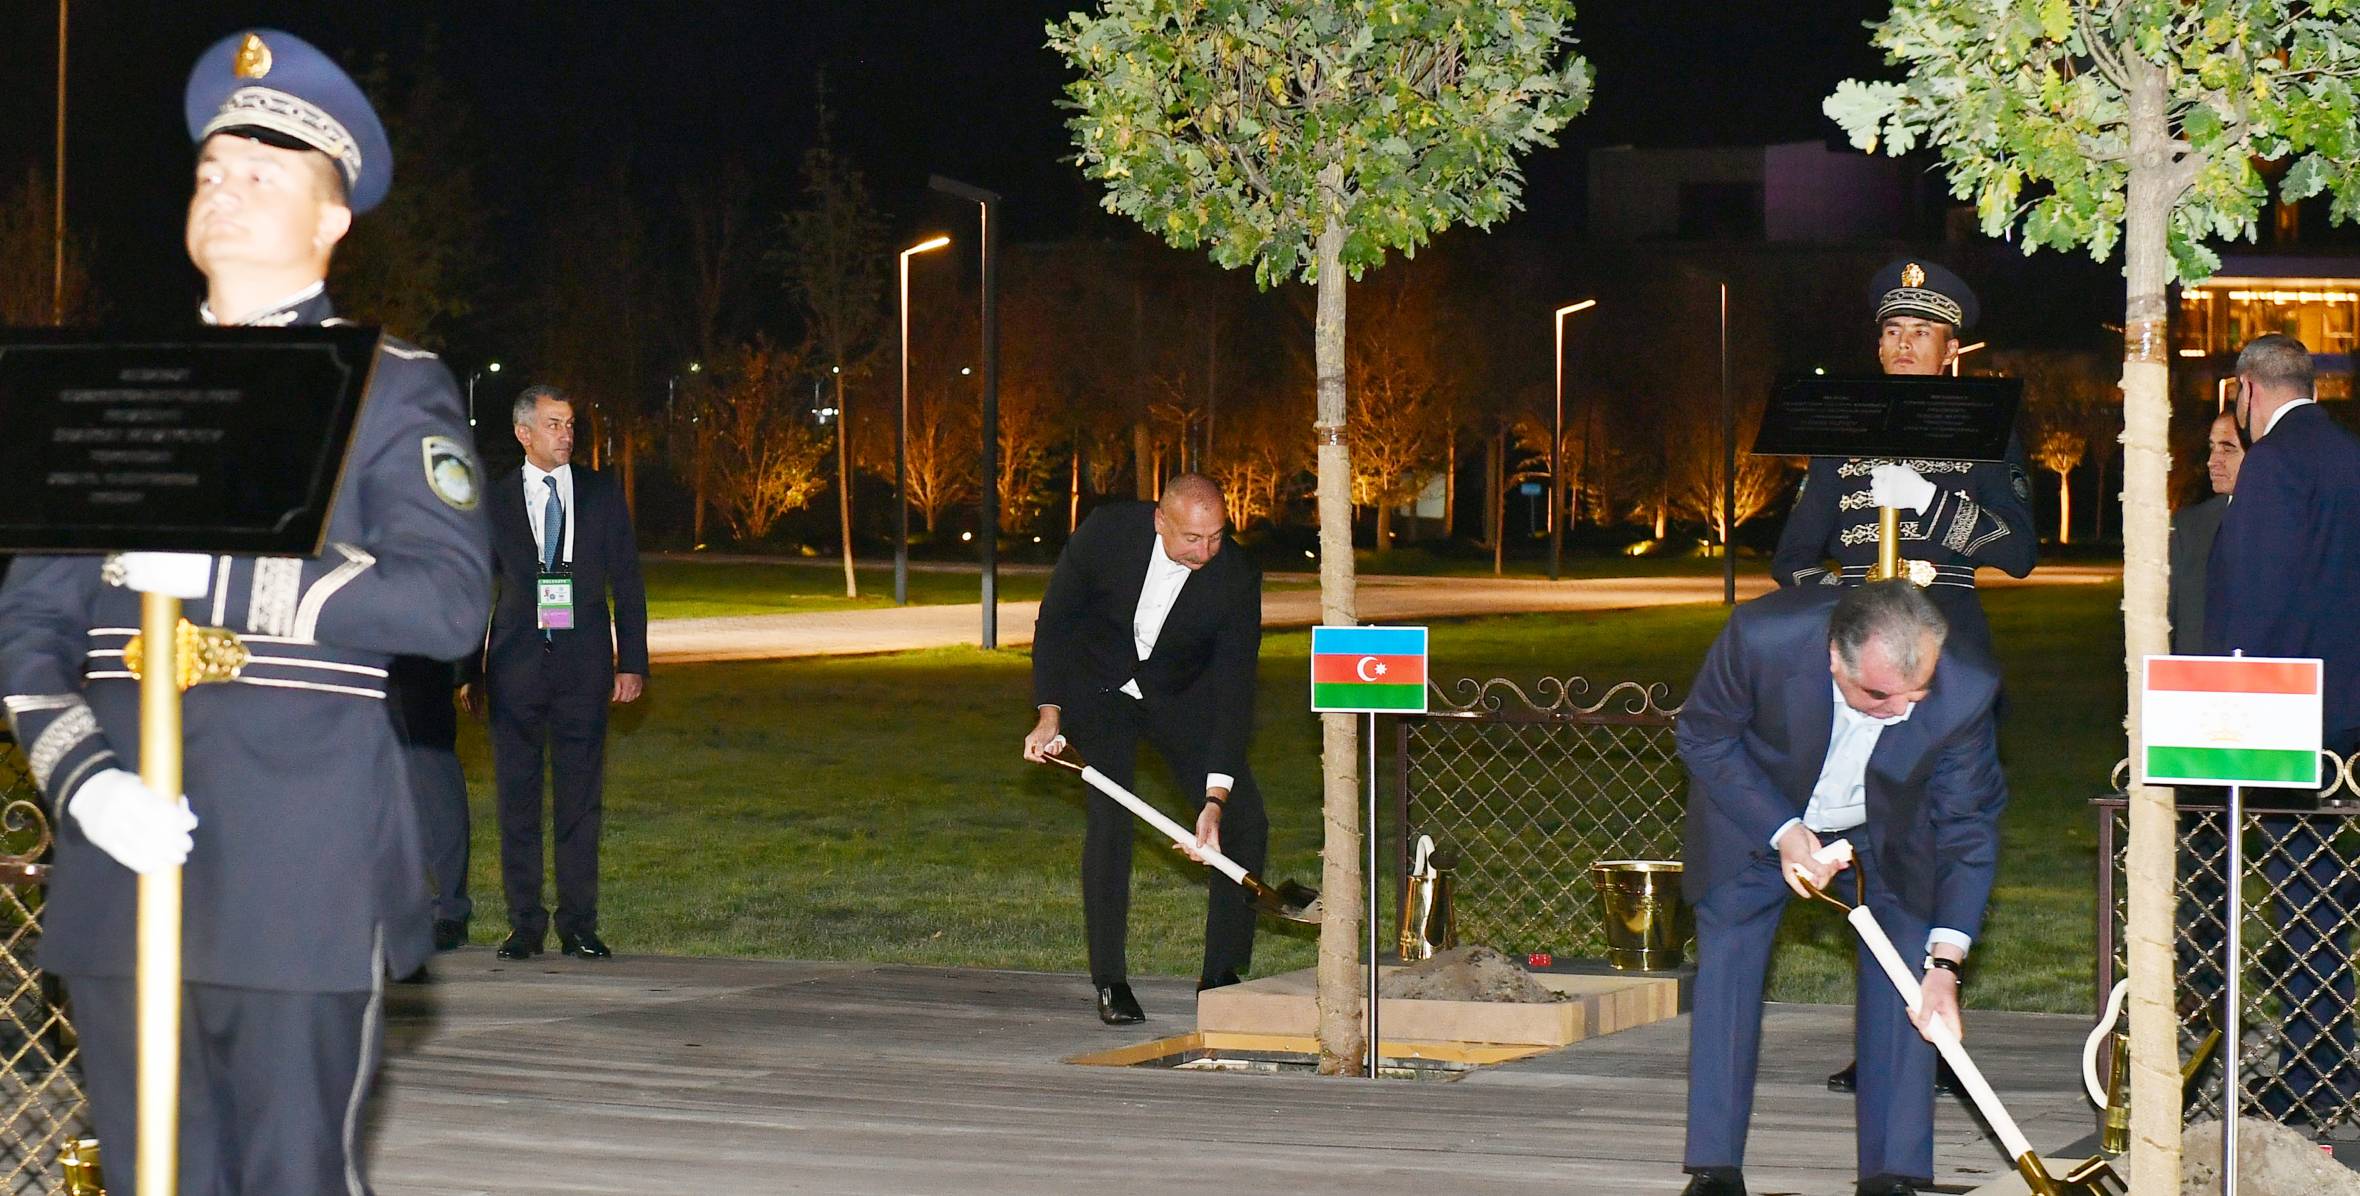 Heads of state and government attending Shanghai Cooperation Organization member states Summit planted trees